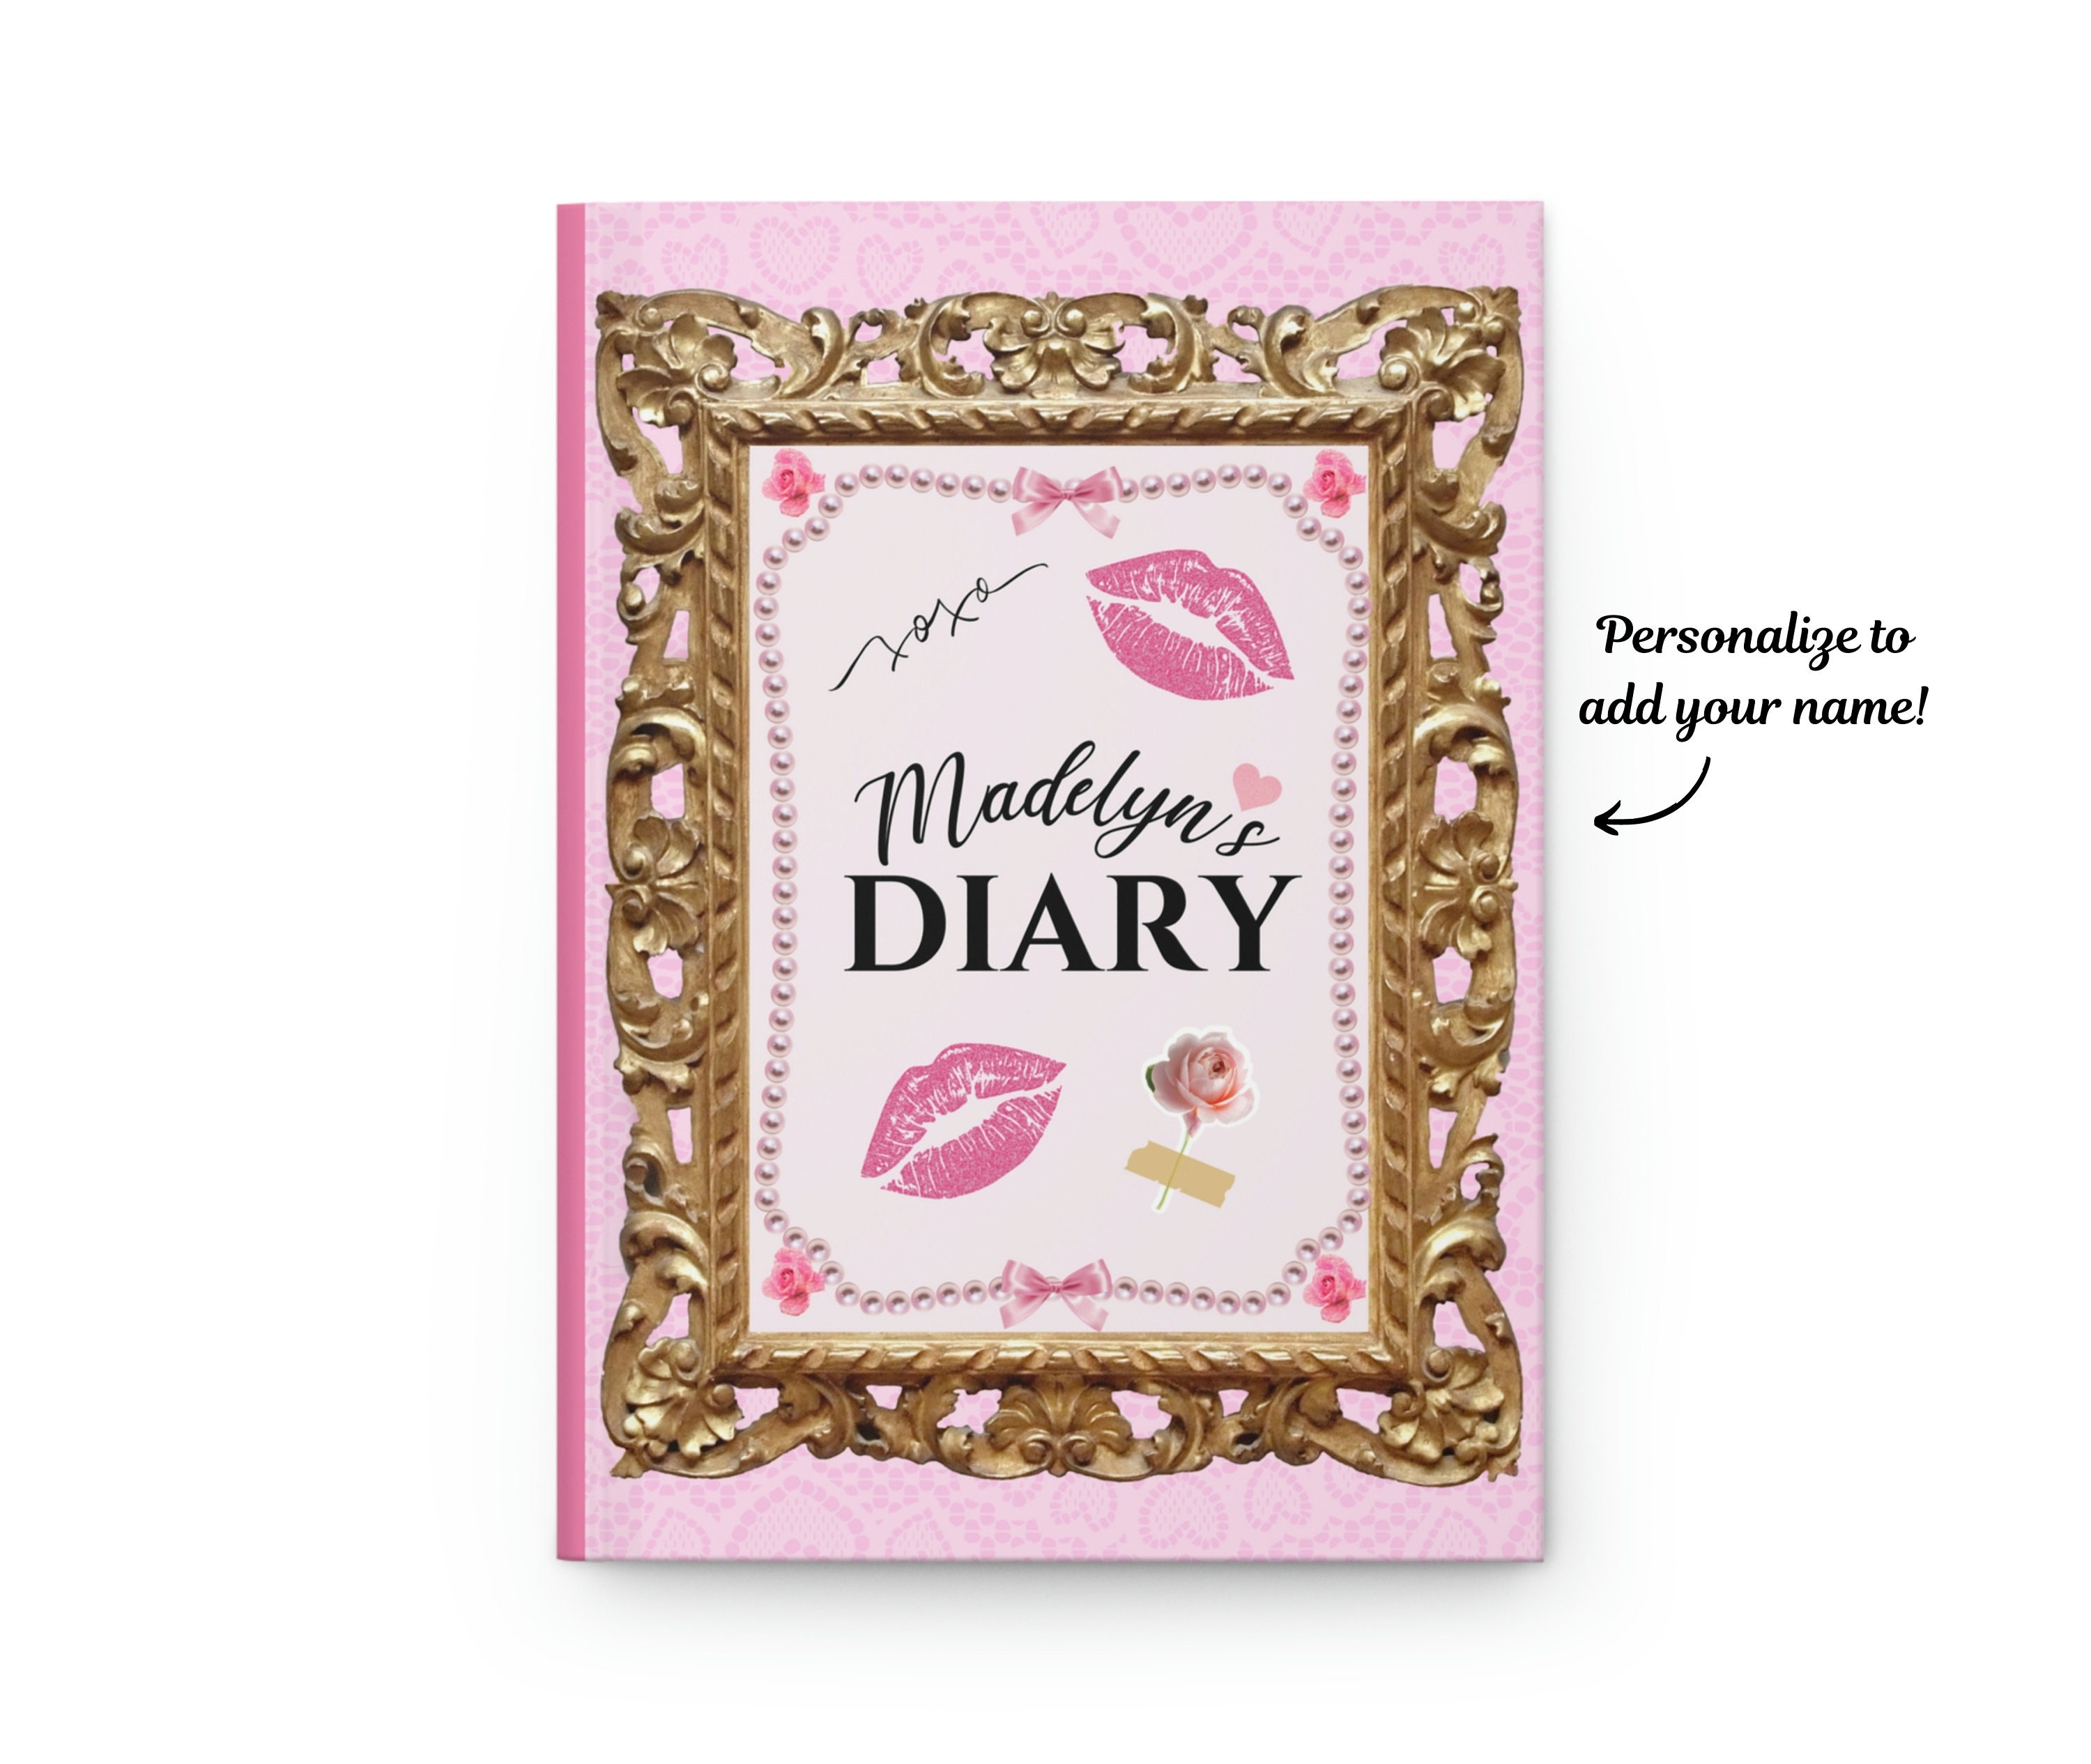 Aesthetic Floral Lined Journal: Vintage, Cottagecore, Coquette Notebook For  Wome